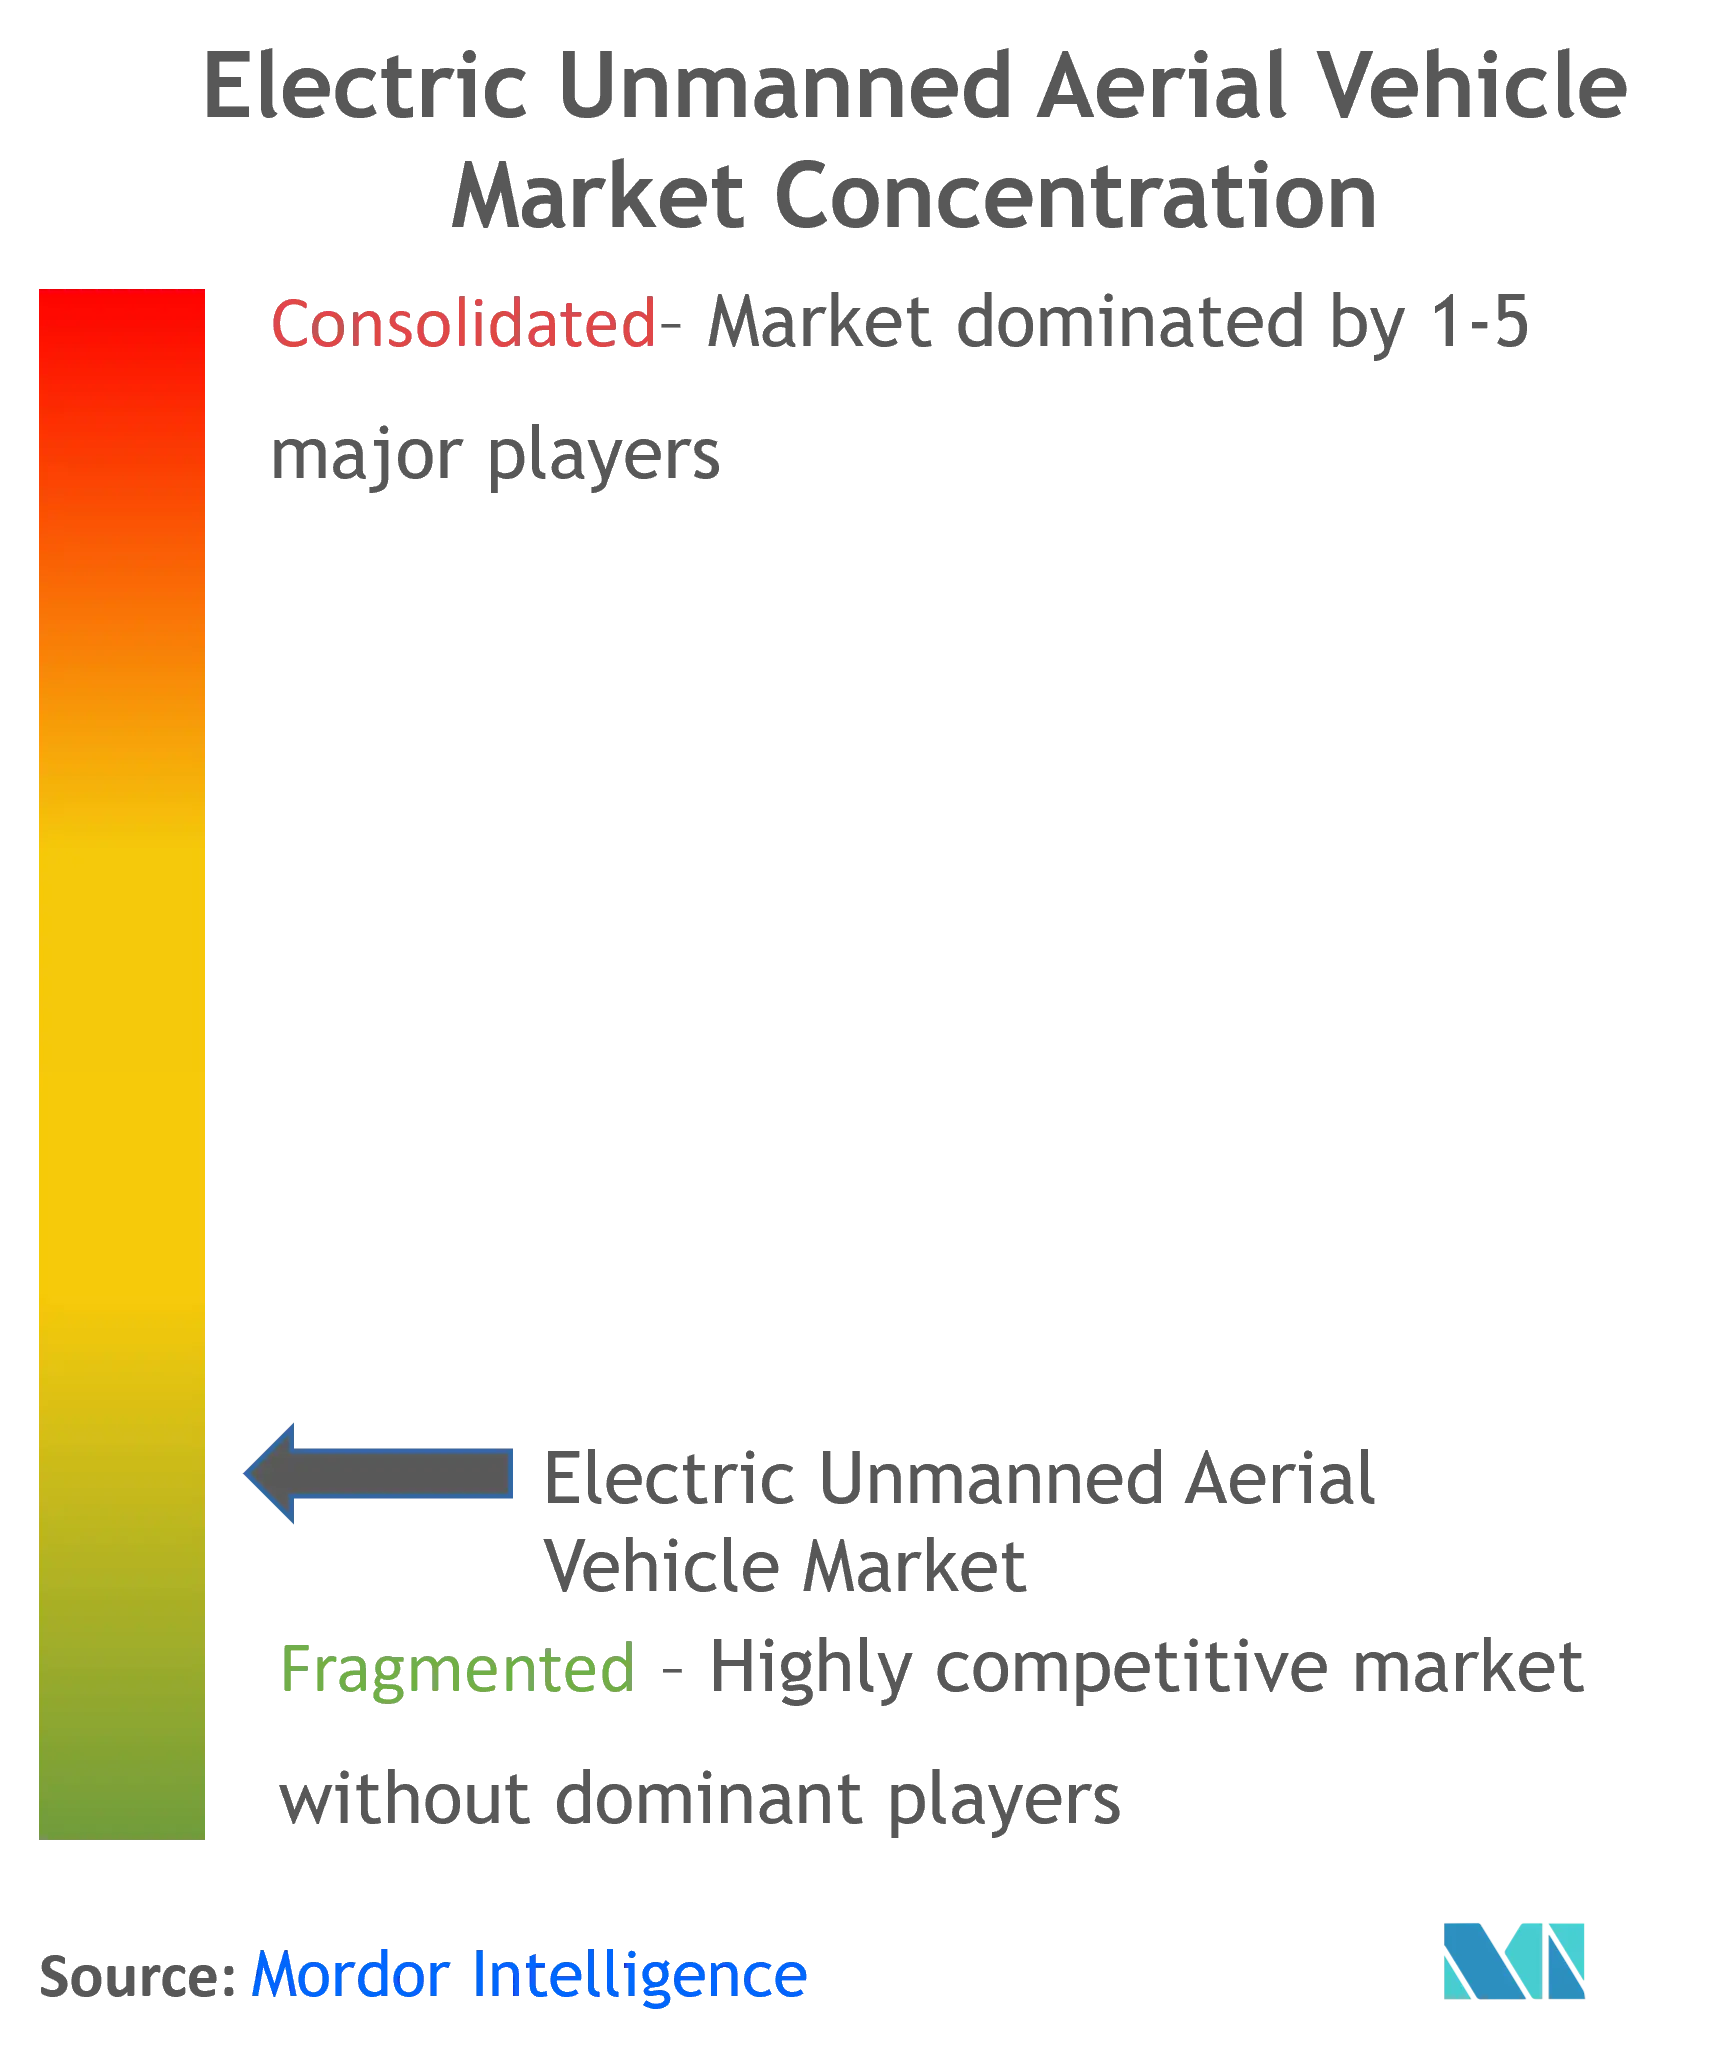 Electric Unmanned Aerial Vehicle Market Concentration